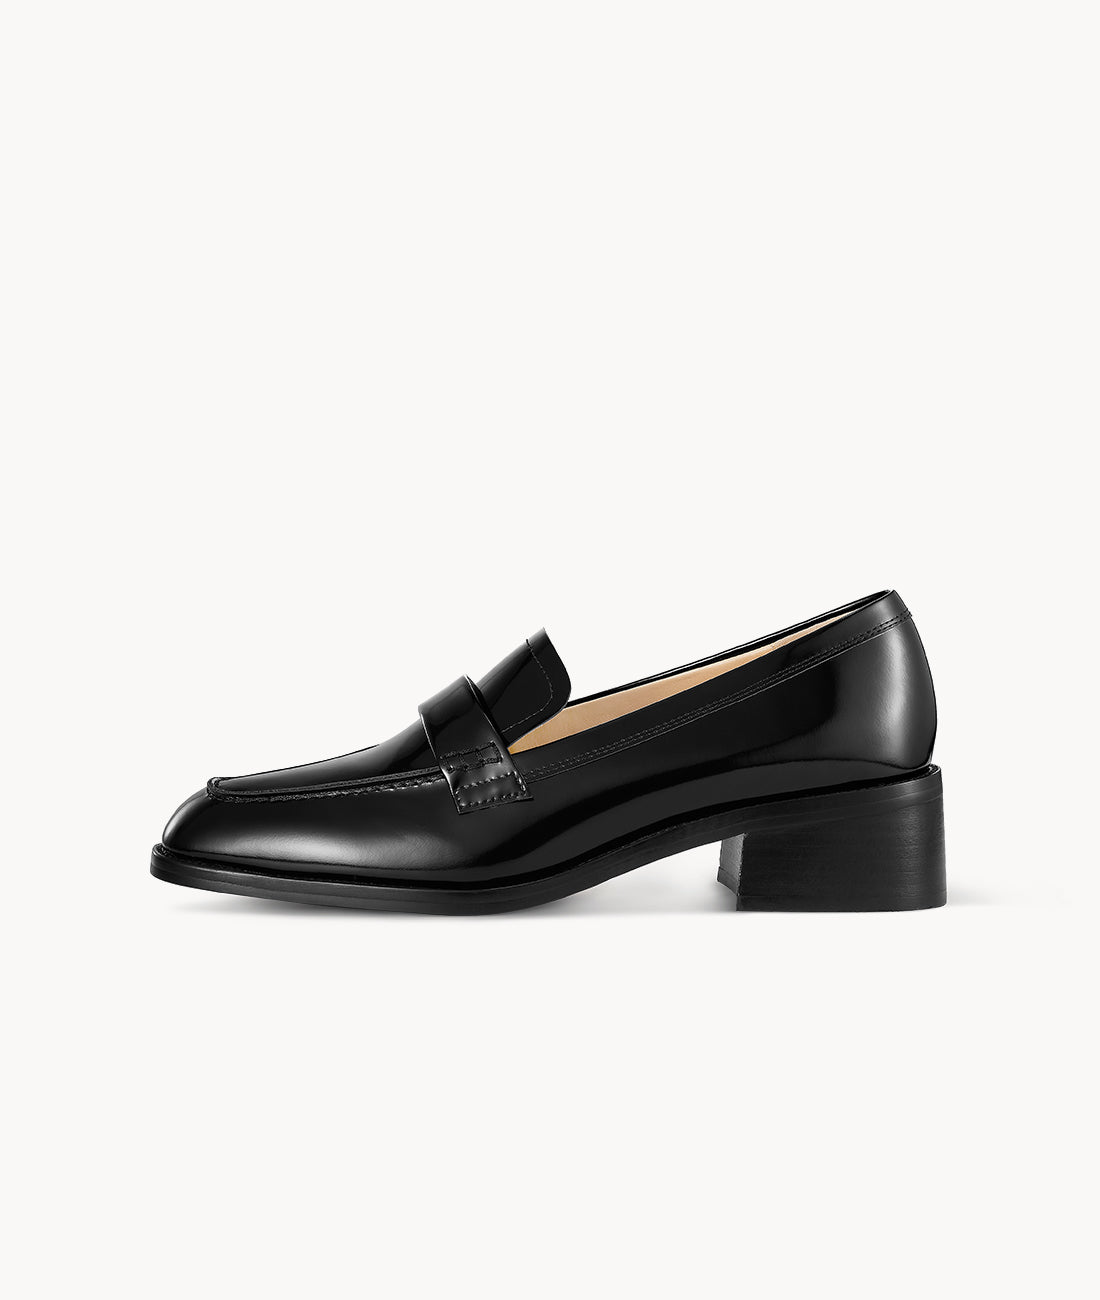 Black Cow Leather Mattress Flat Loafers with 35mm block heel